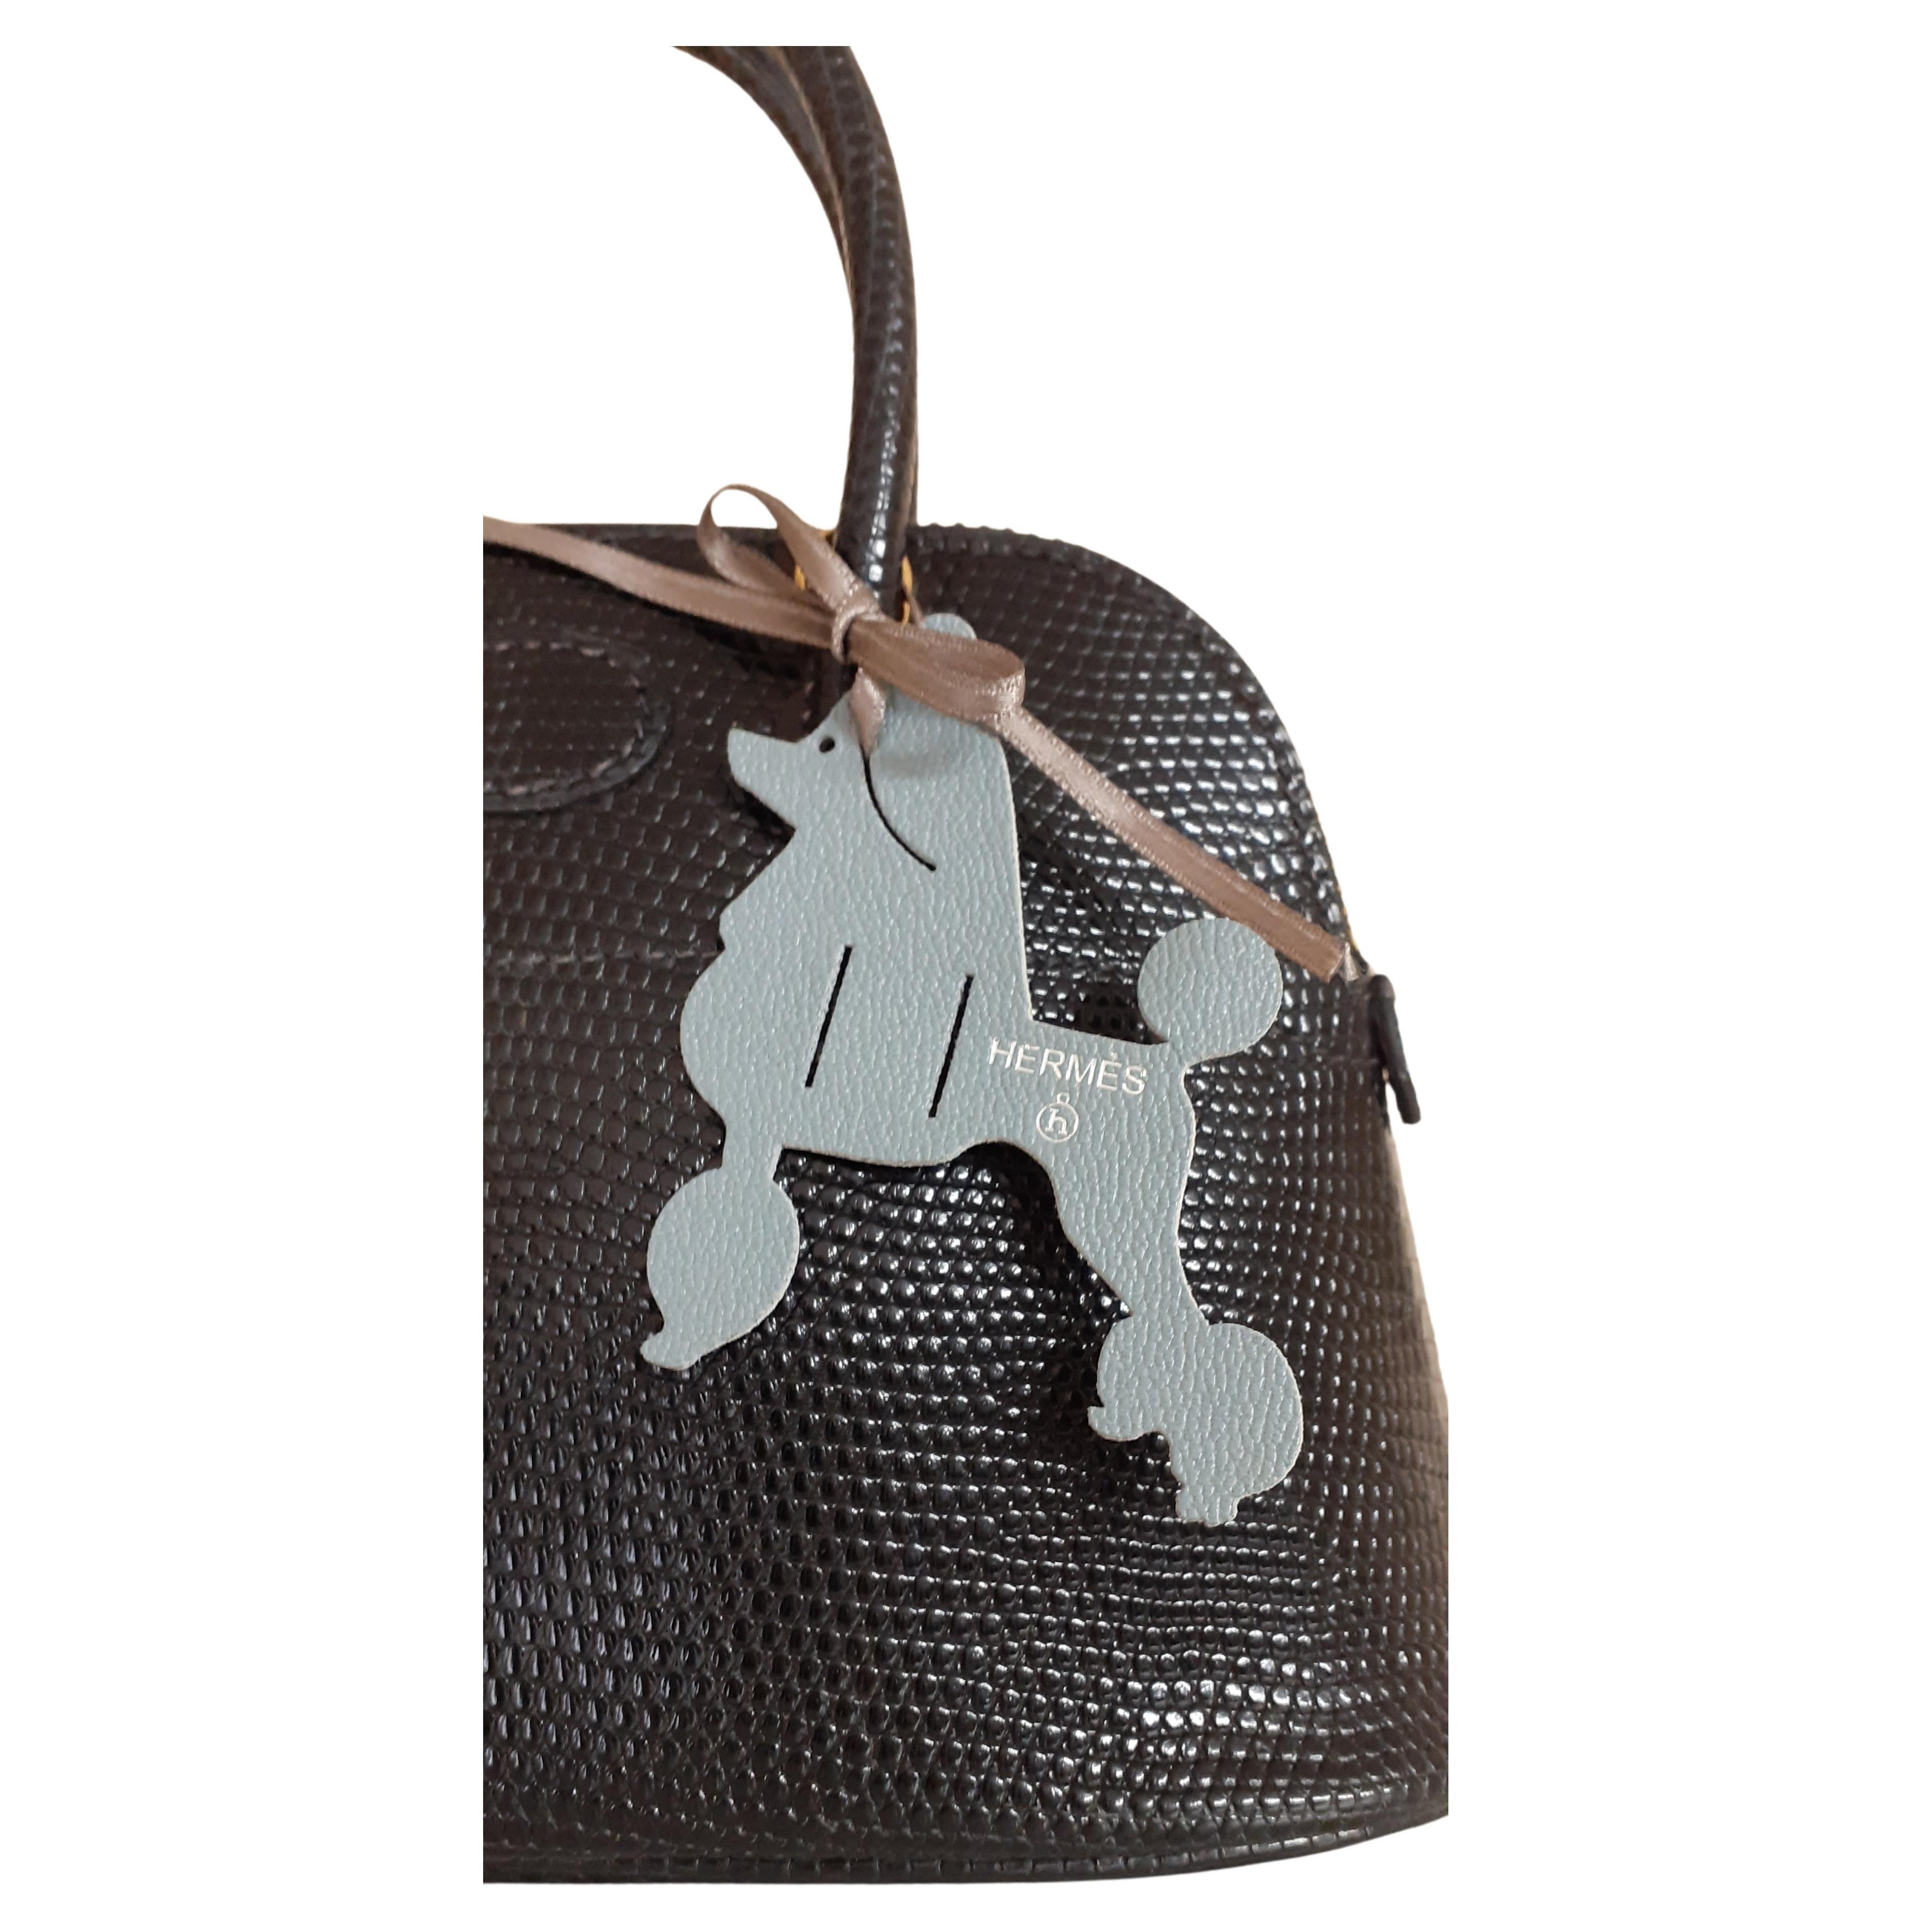 Super Cute Authentic Hermès Charm

In shape of a Royal Poodle

From the Petit h collection

Made in France

Made of leather

Colorway: blue grey 

This charm adorned the packaging of a small h item, so it has only one side

